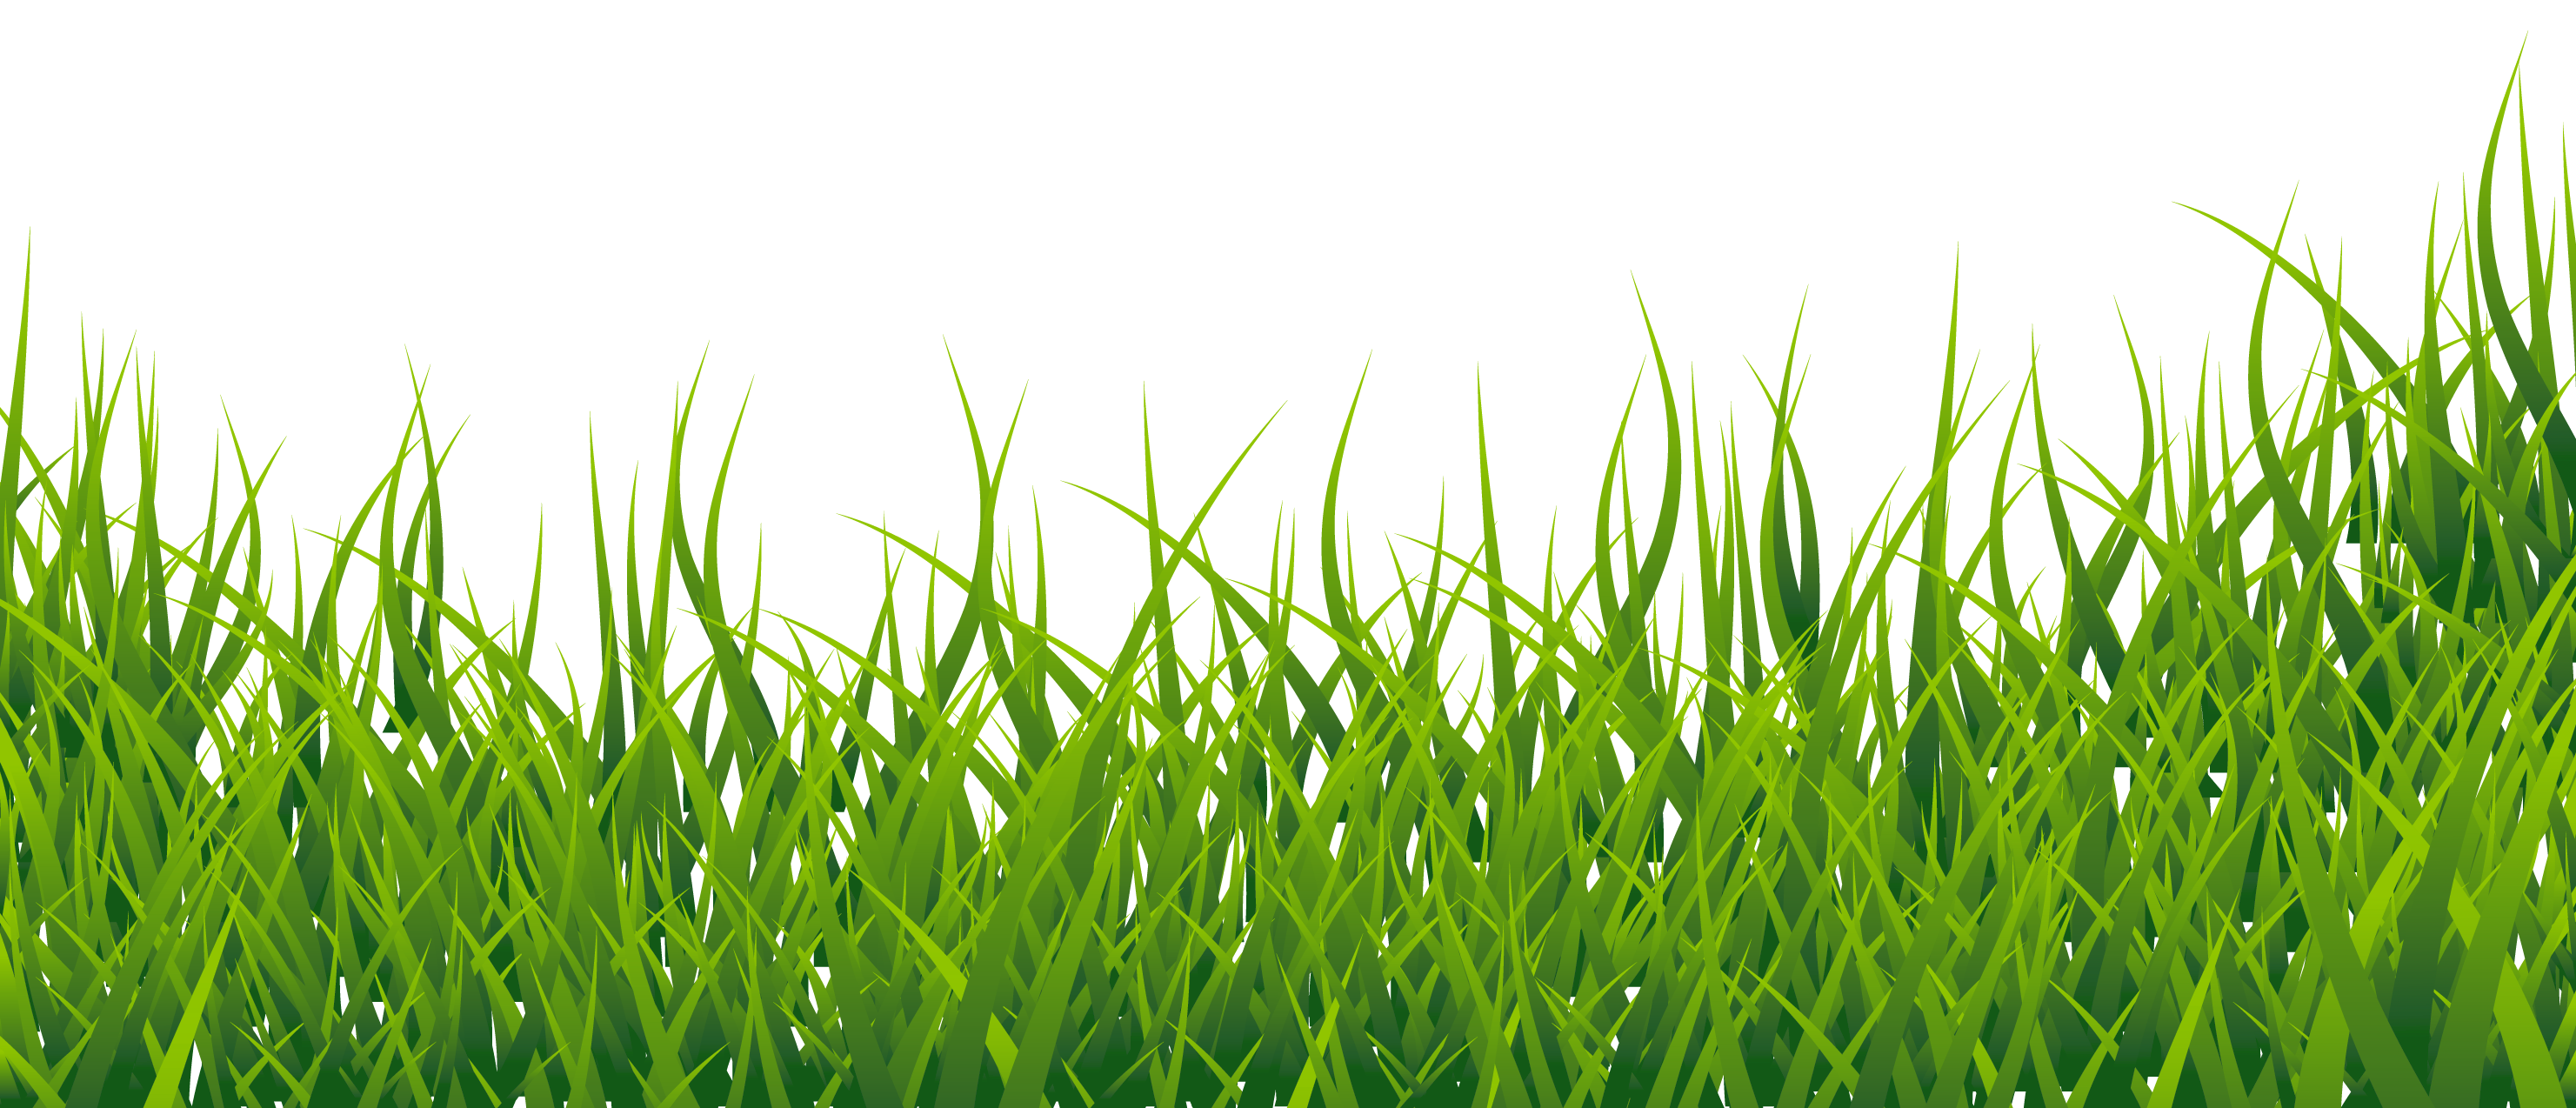 Grass Silhouette Png 53887